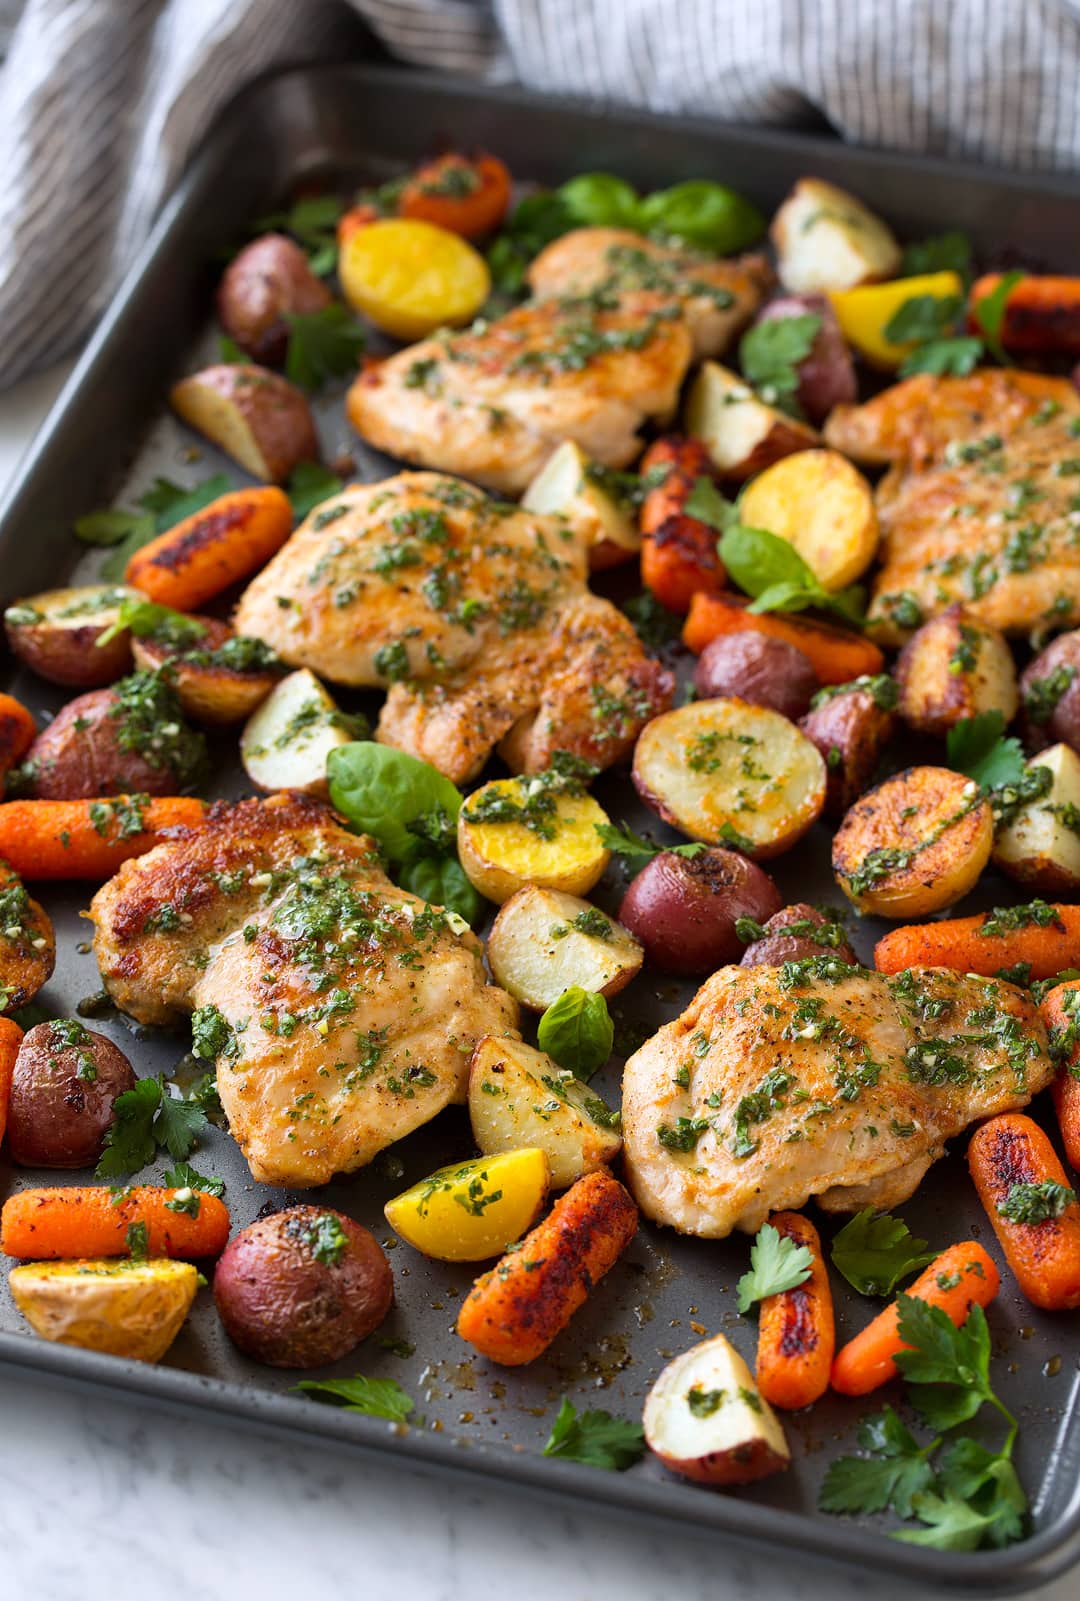 Roasted Chicken and Veggies with Garlic Herb Vinaigrette Cooking Classy